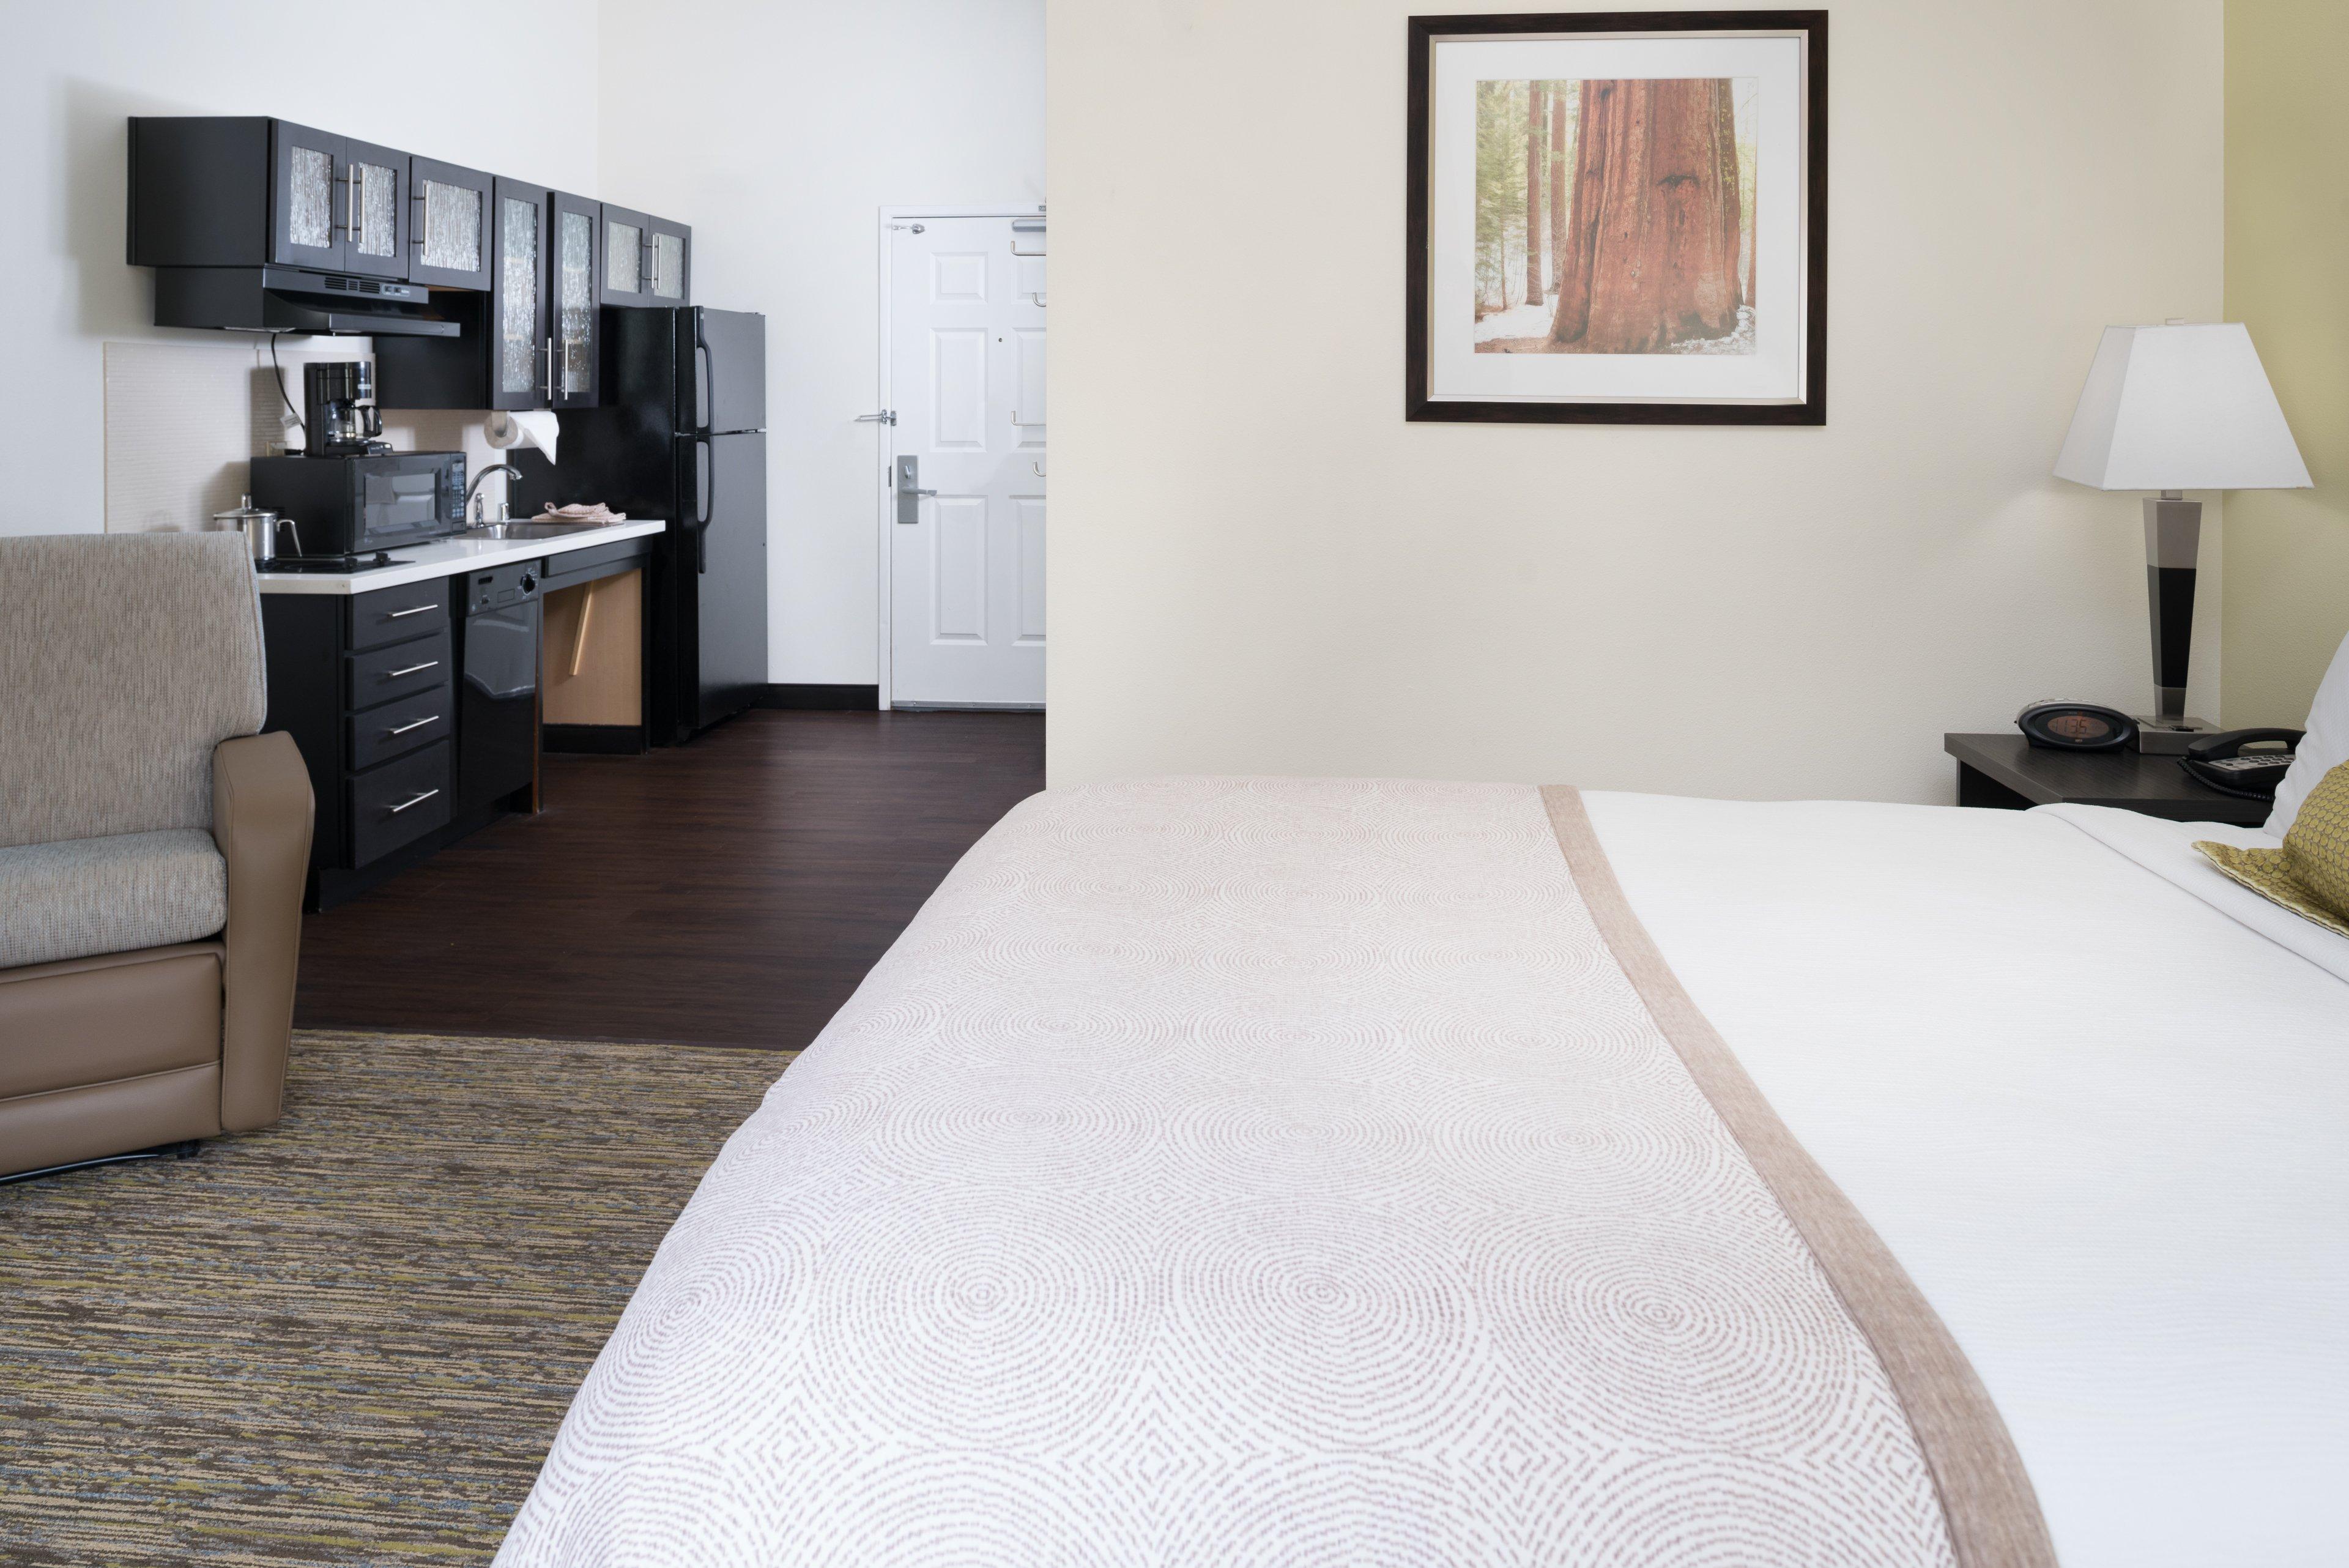 Candlewood Suites Olympia - Lacey, An Ihg Hotel 외부 사진